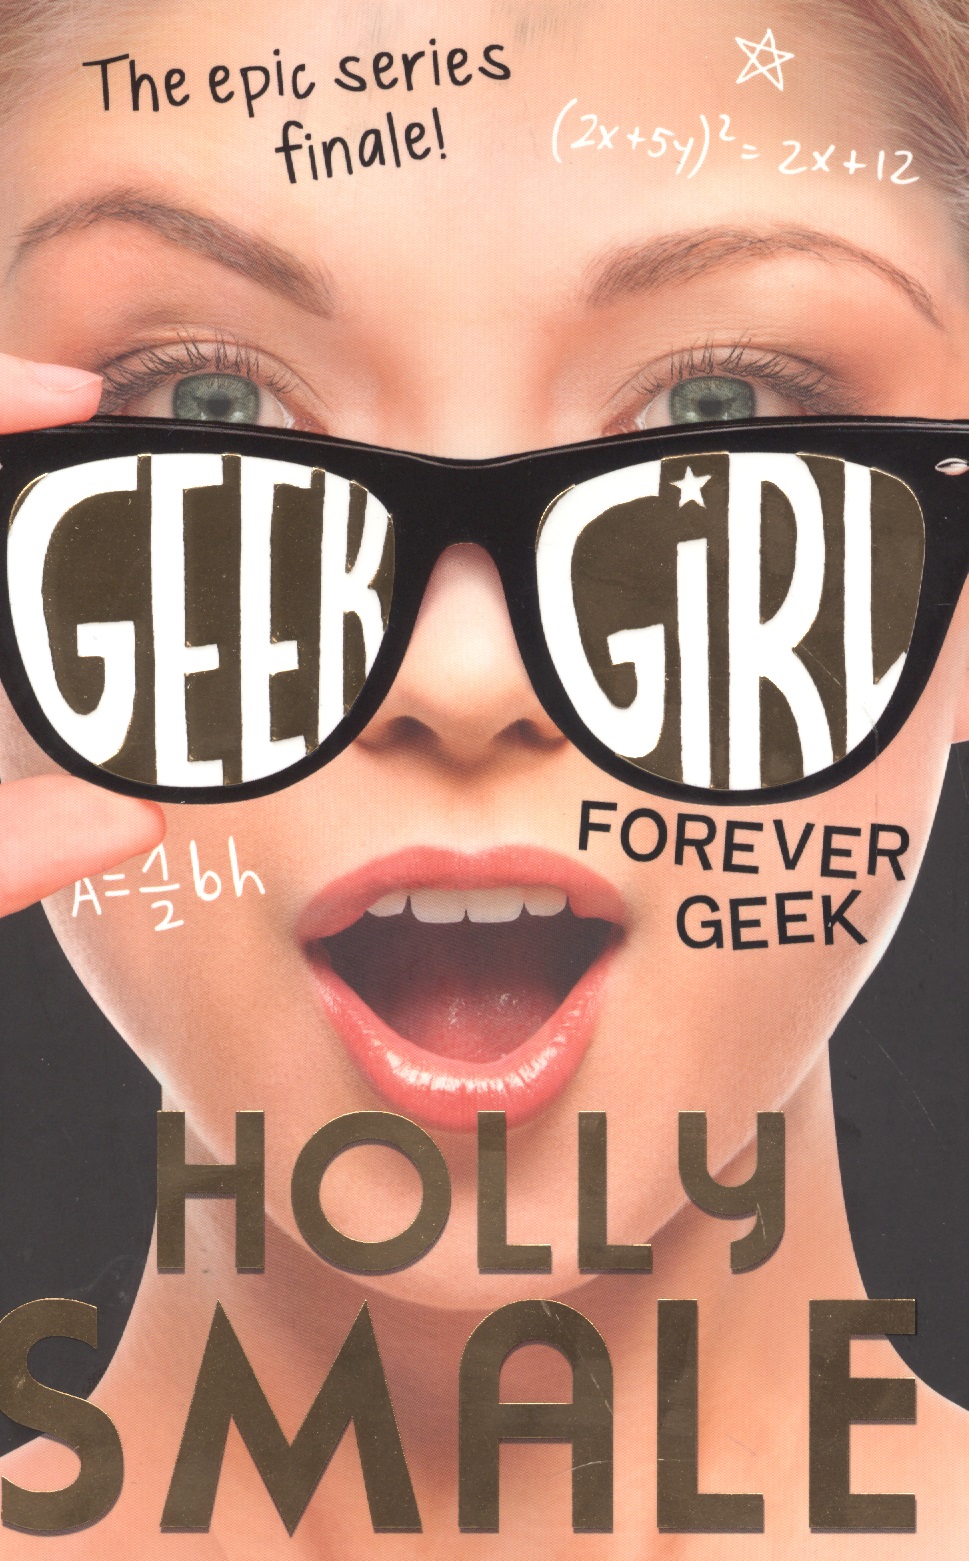 Smale Holly Forever Geek (Geek Girl, Book 6) (м) Smale